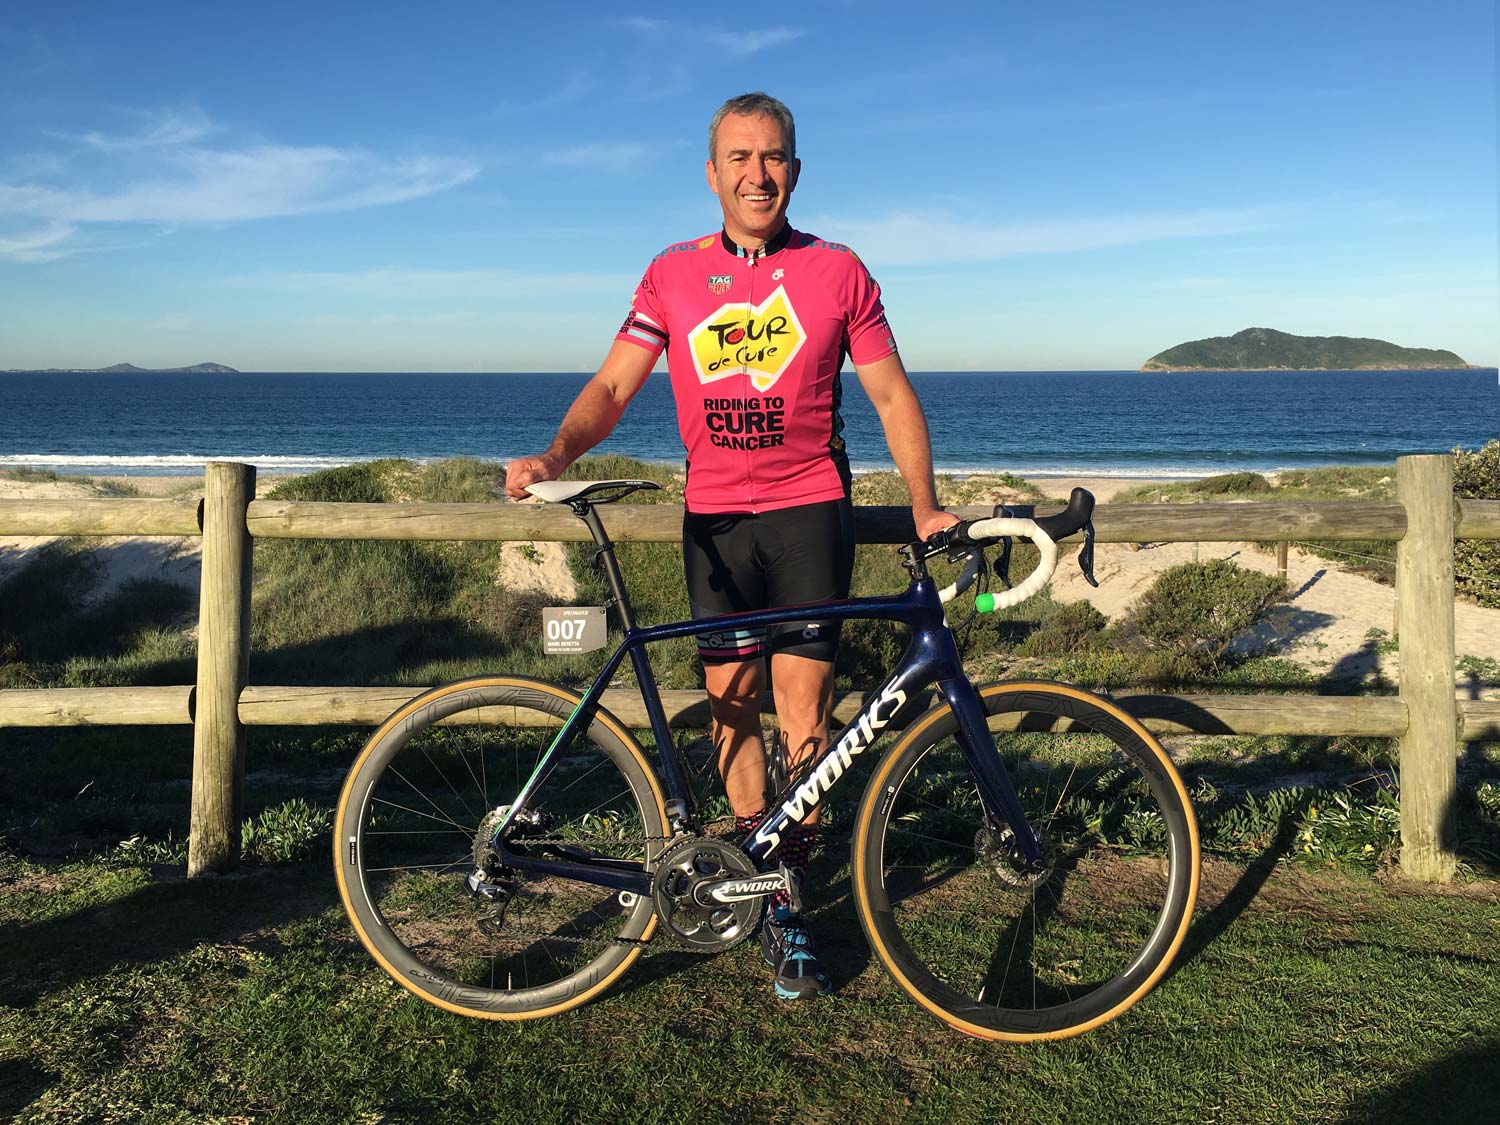 TV personality Mark Beretta is a regular member of the Tour de Cure peloton. "To me it's just such a unique sport and it offers psych a great experience," says Beretta of his cycling. "It's my favourite thing." Photo: Rob Arnold